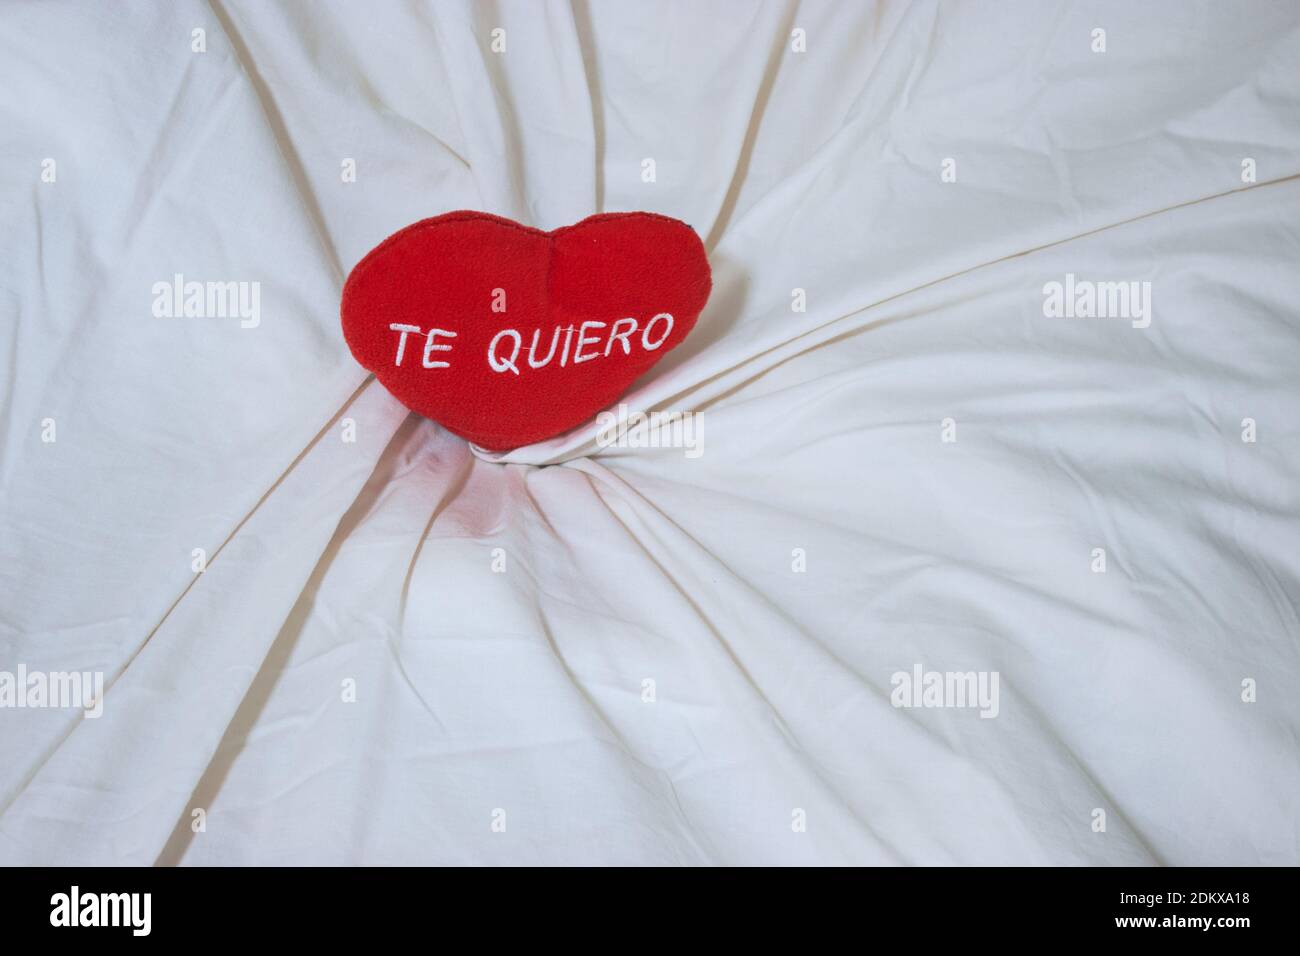 Red heart with embroidered text 'Te quiero'. Pillow cushion on bed of a couple in love. Valentine's Day concept 2021. Stock Photo